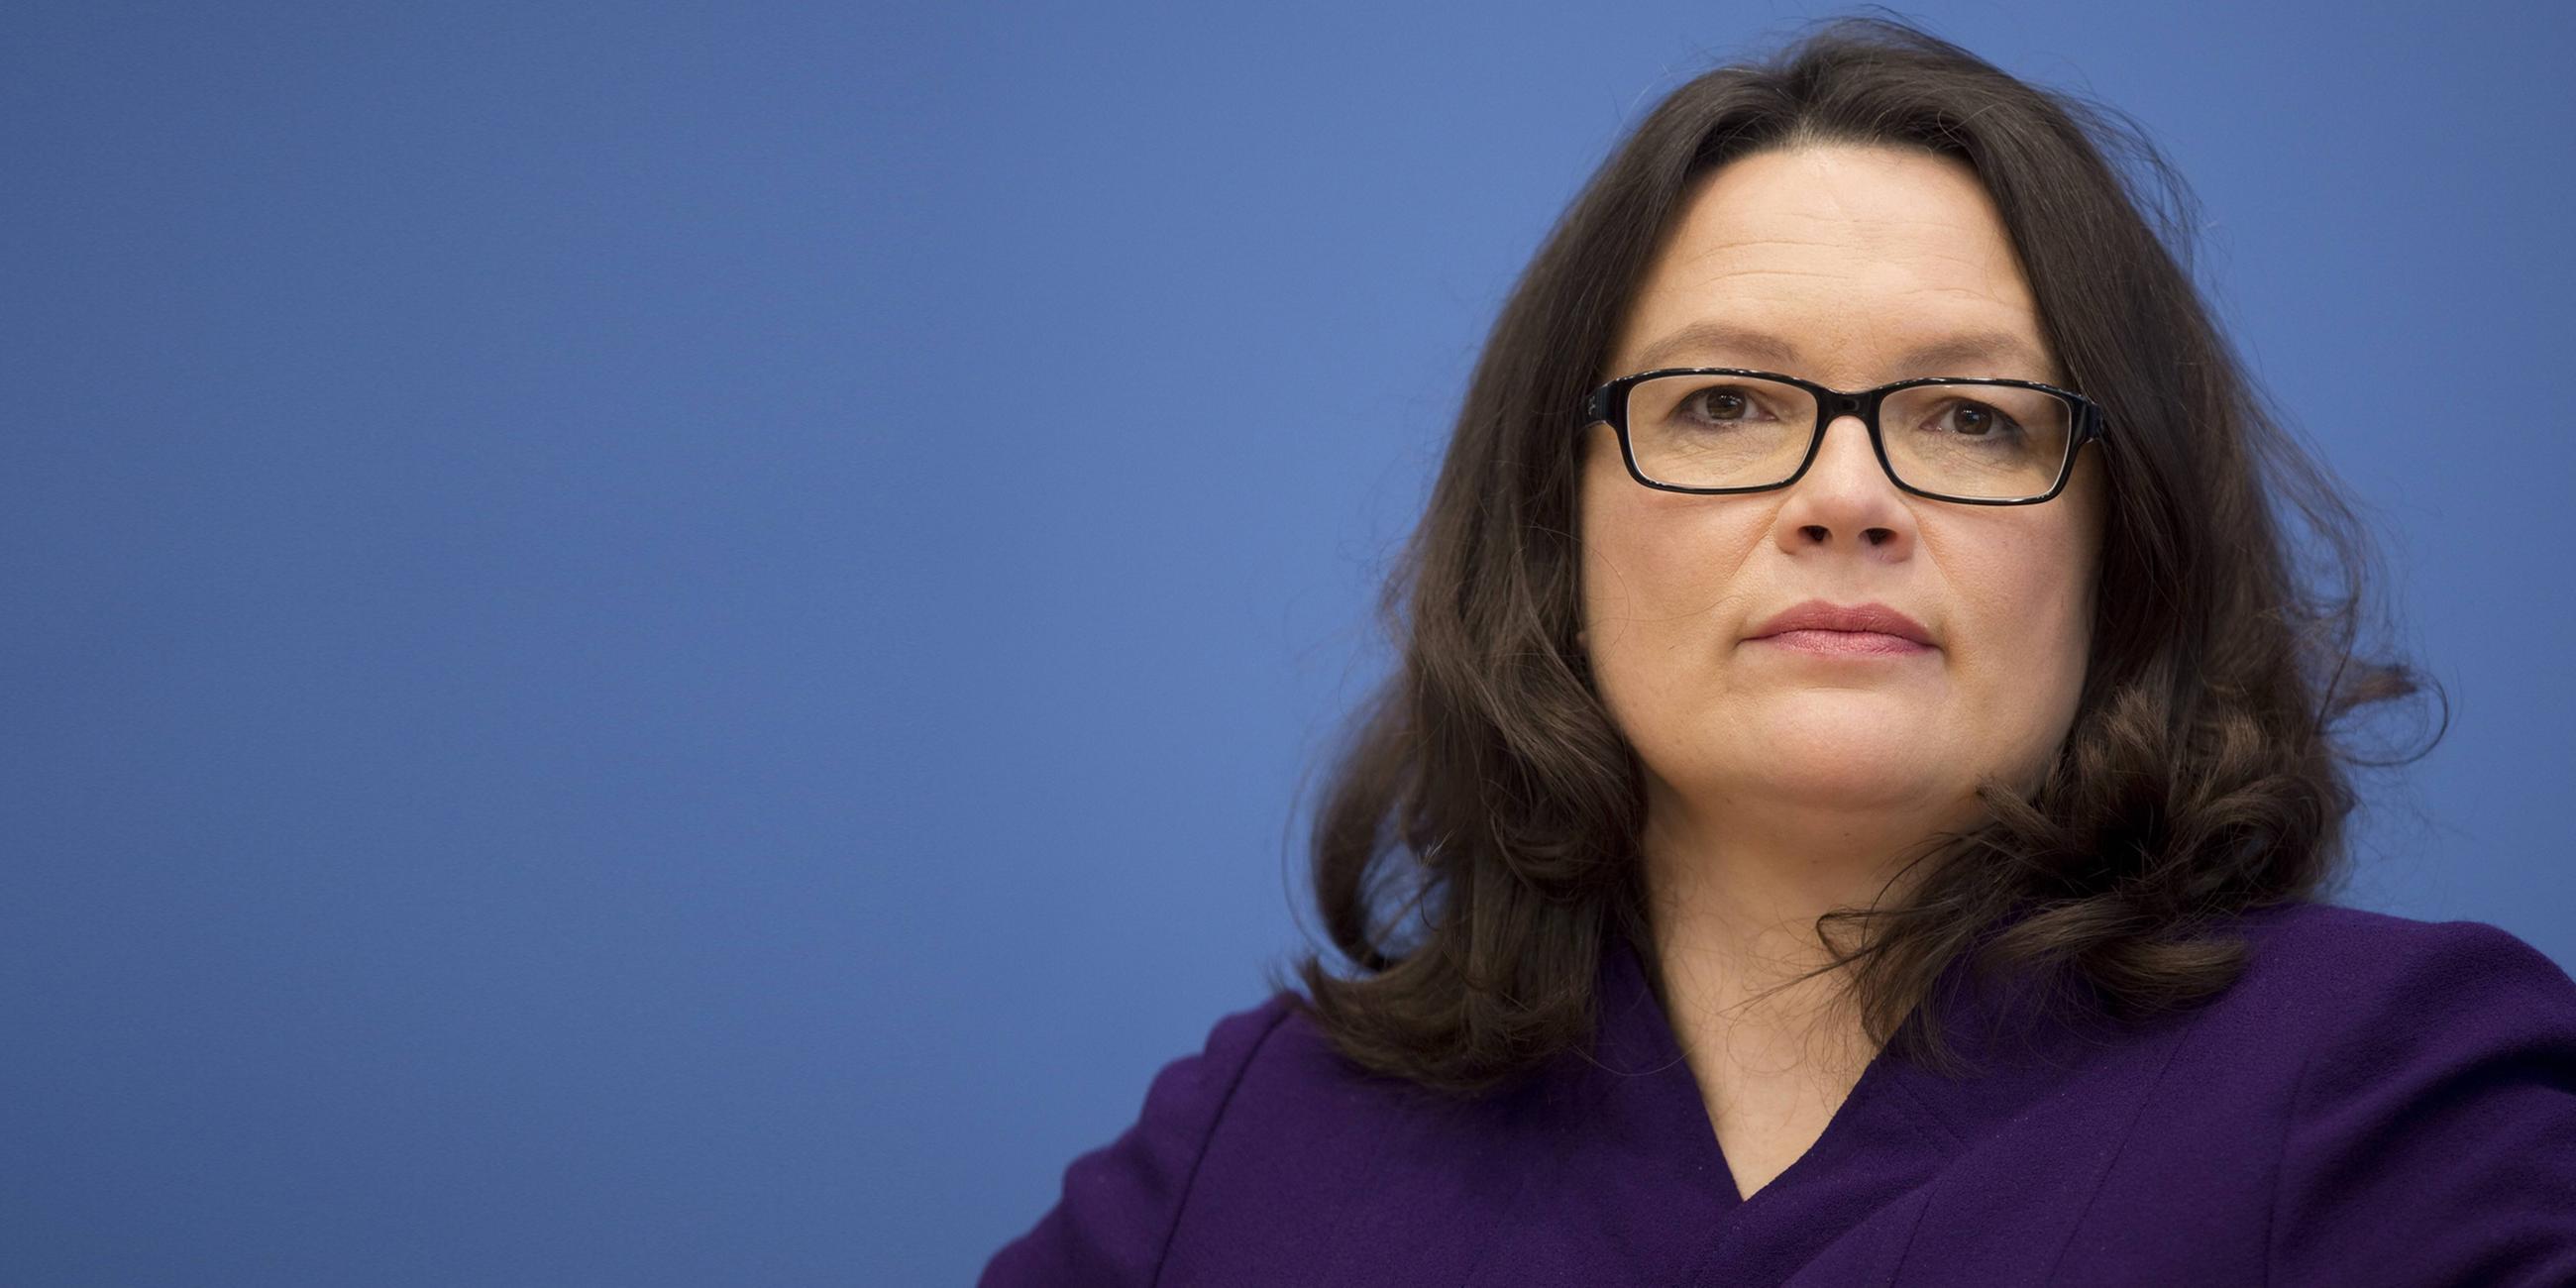 Archiv: Andrea Nahles am 01.12.2015 in Berlin